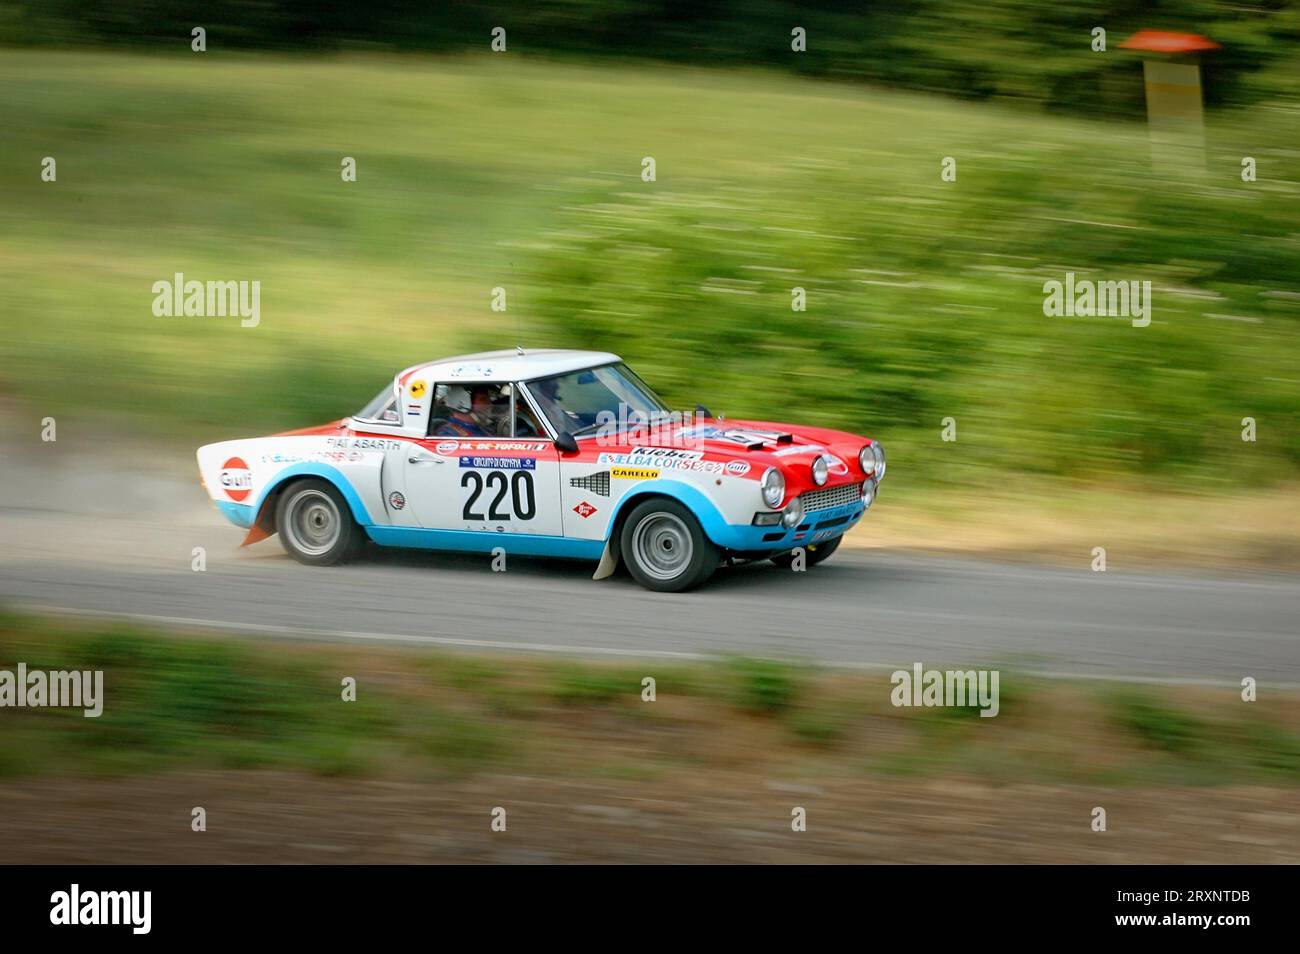 Italy - September 7, 2005 - Unidentified drivers on a white, blue and red vintage Fiat Abarth racing car Stock Photo